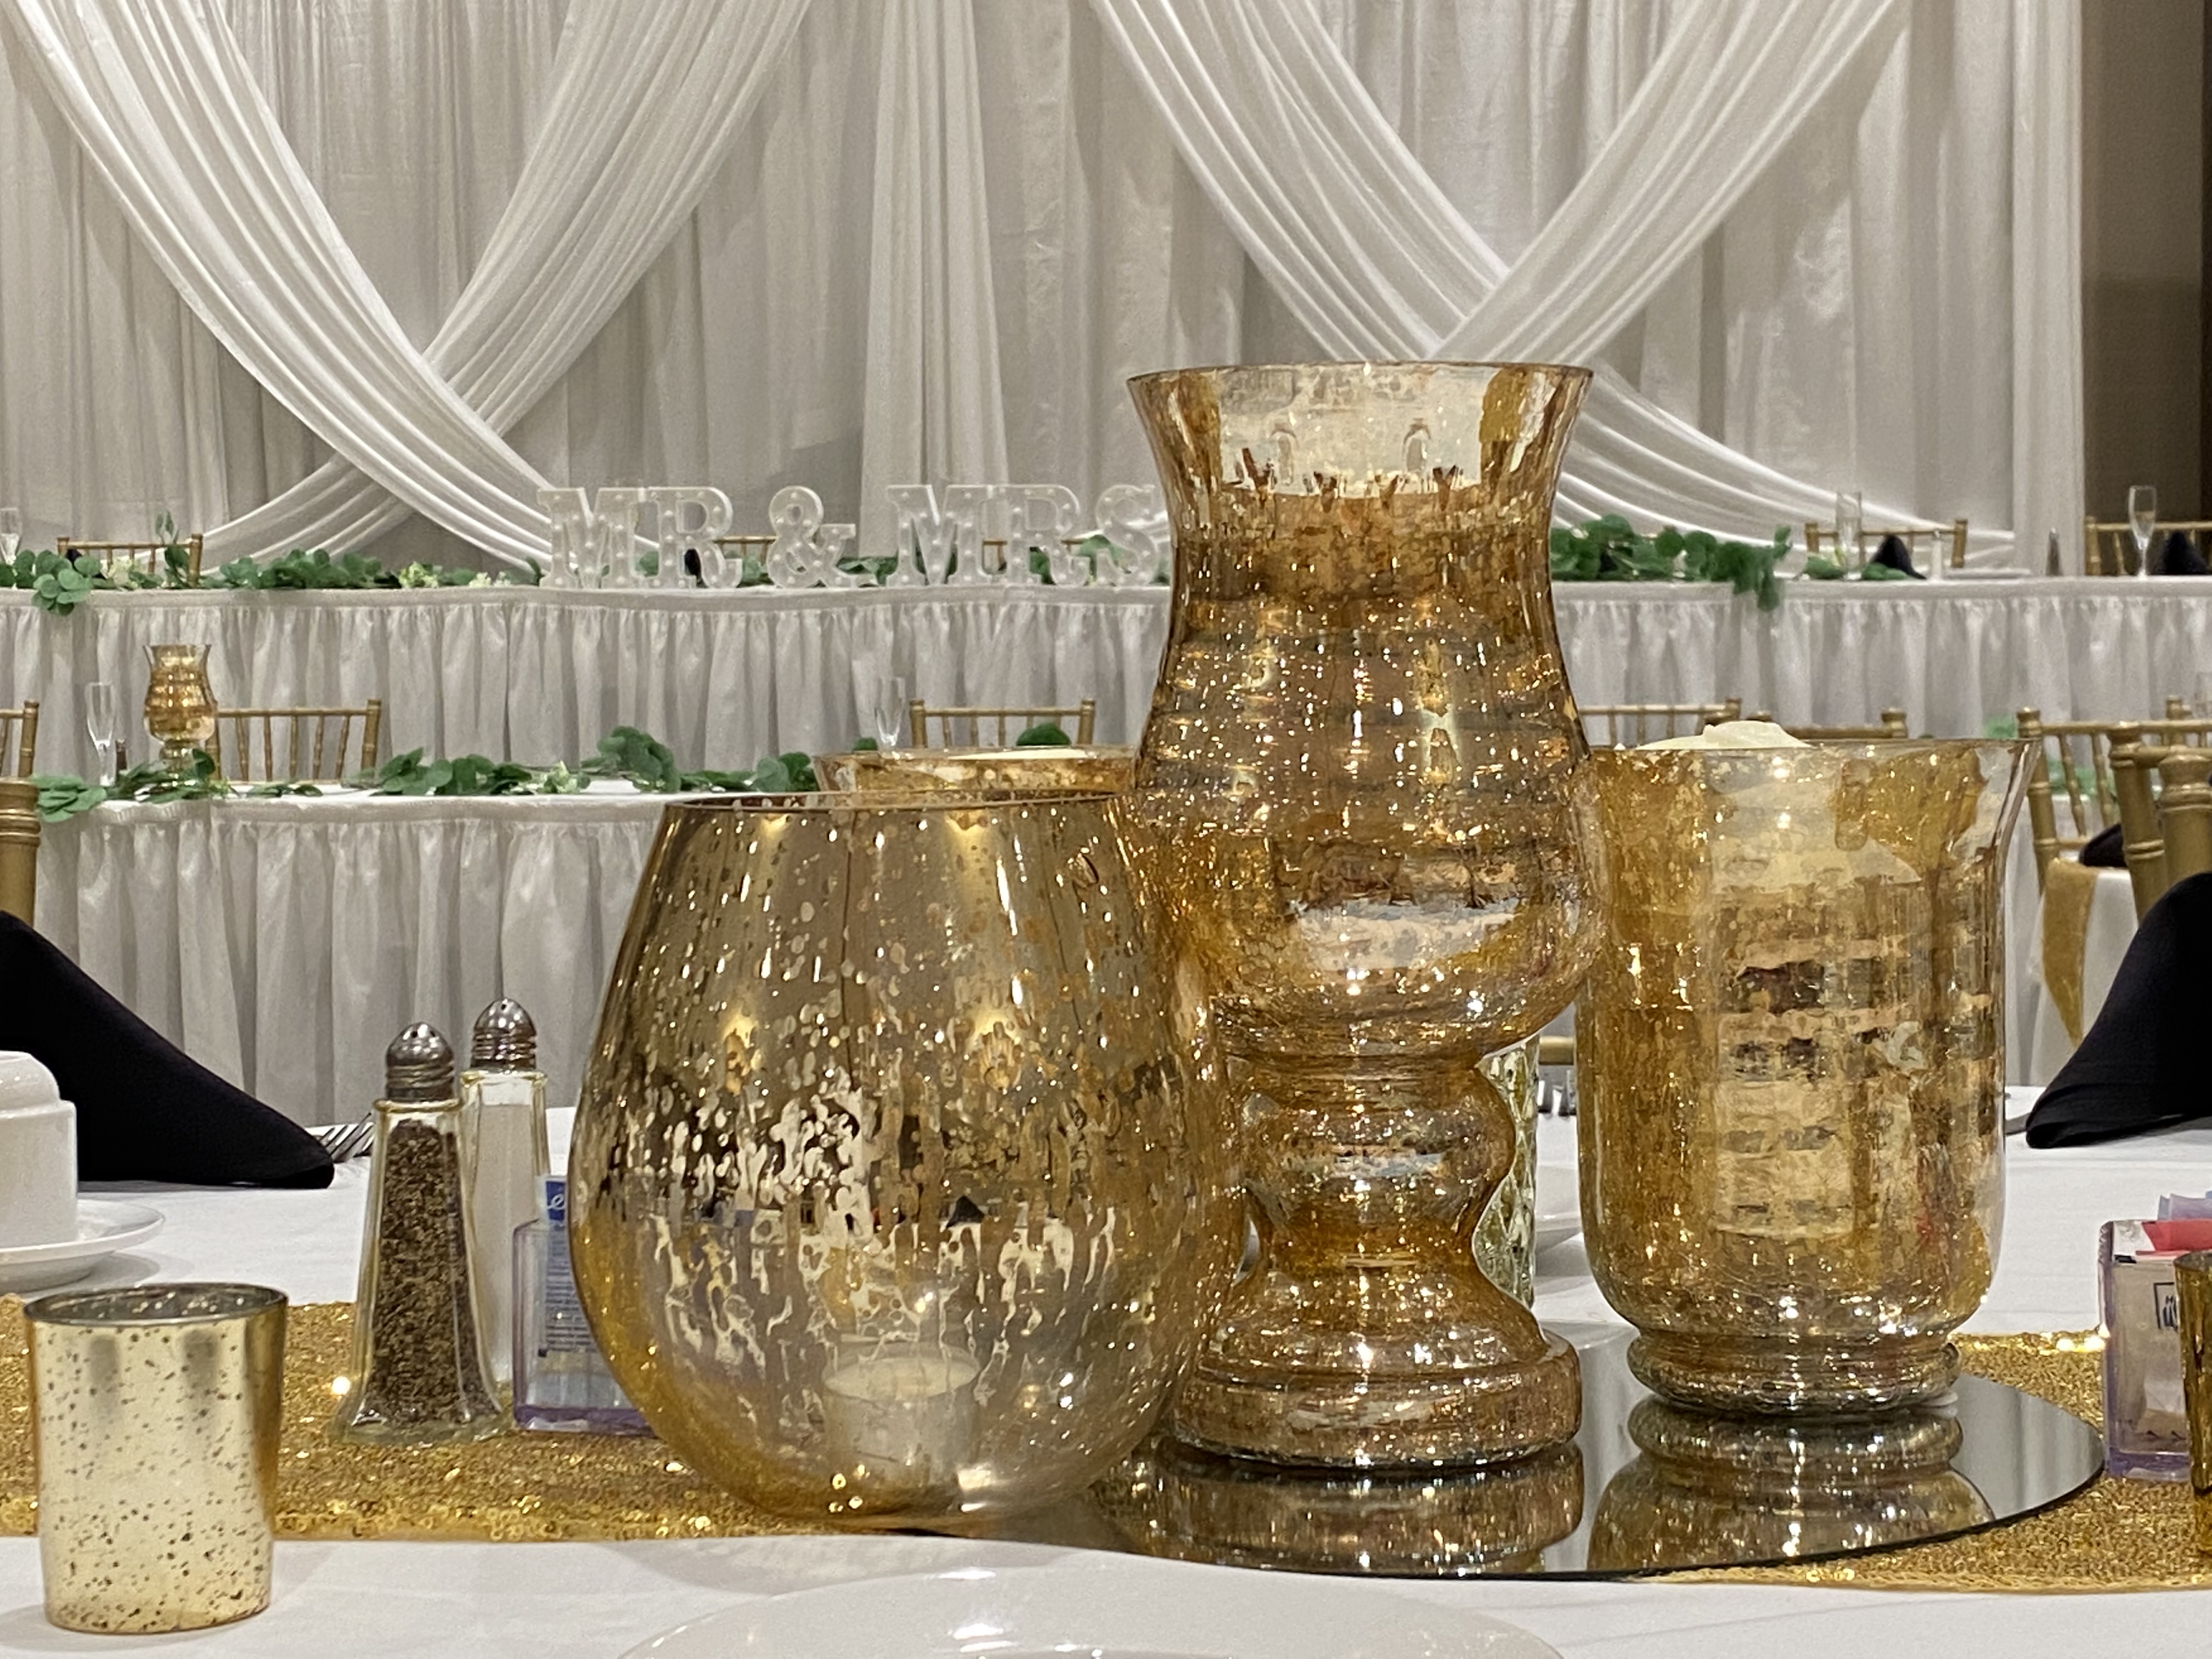 decor on event table